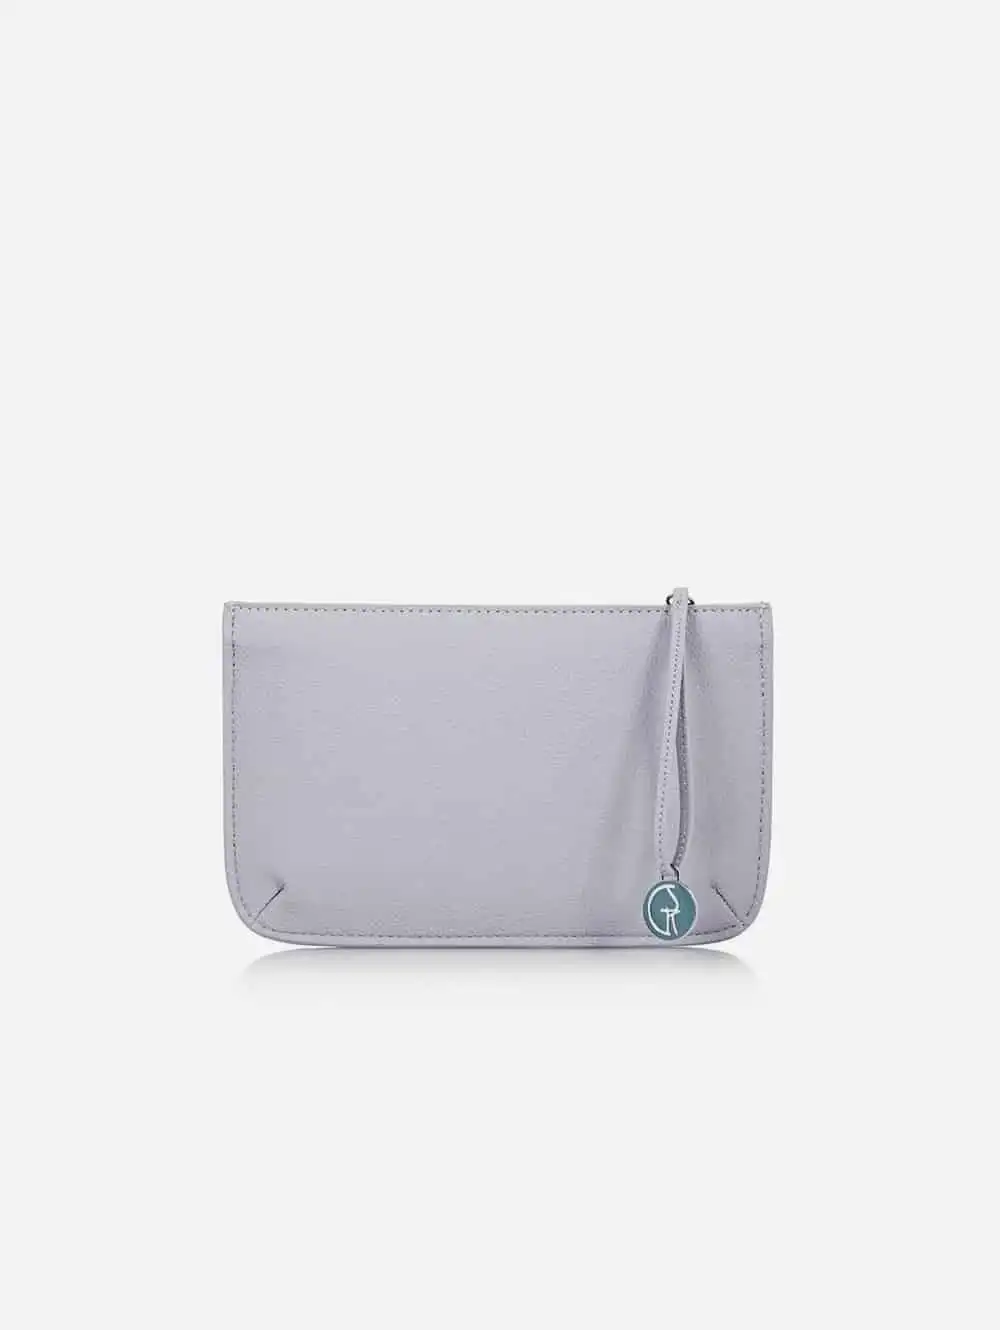 The Morphbag by GSK clutch